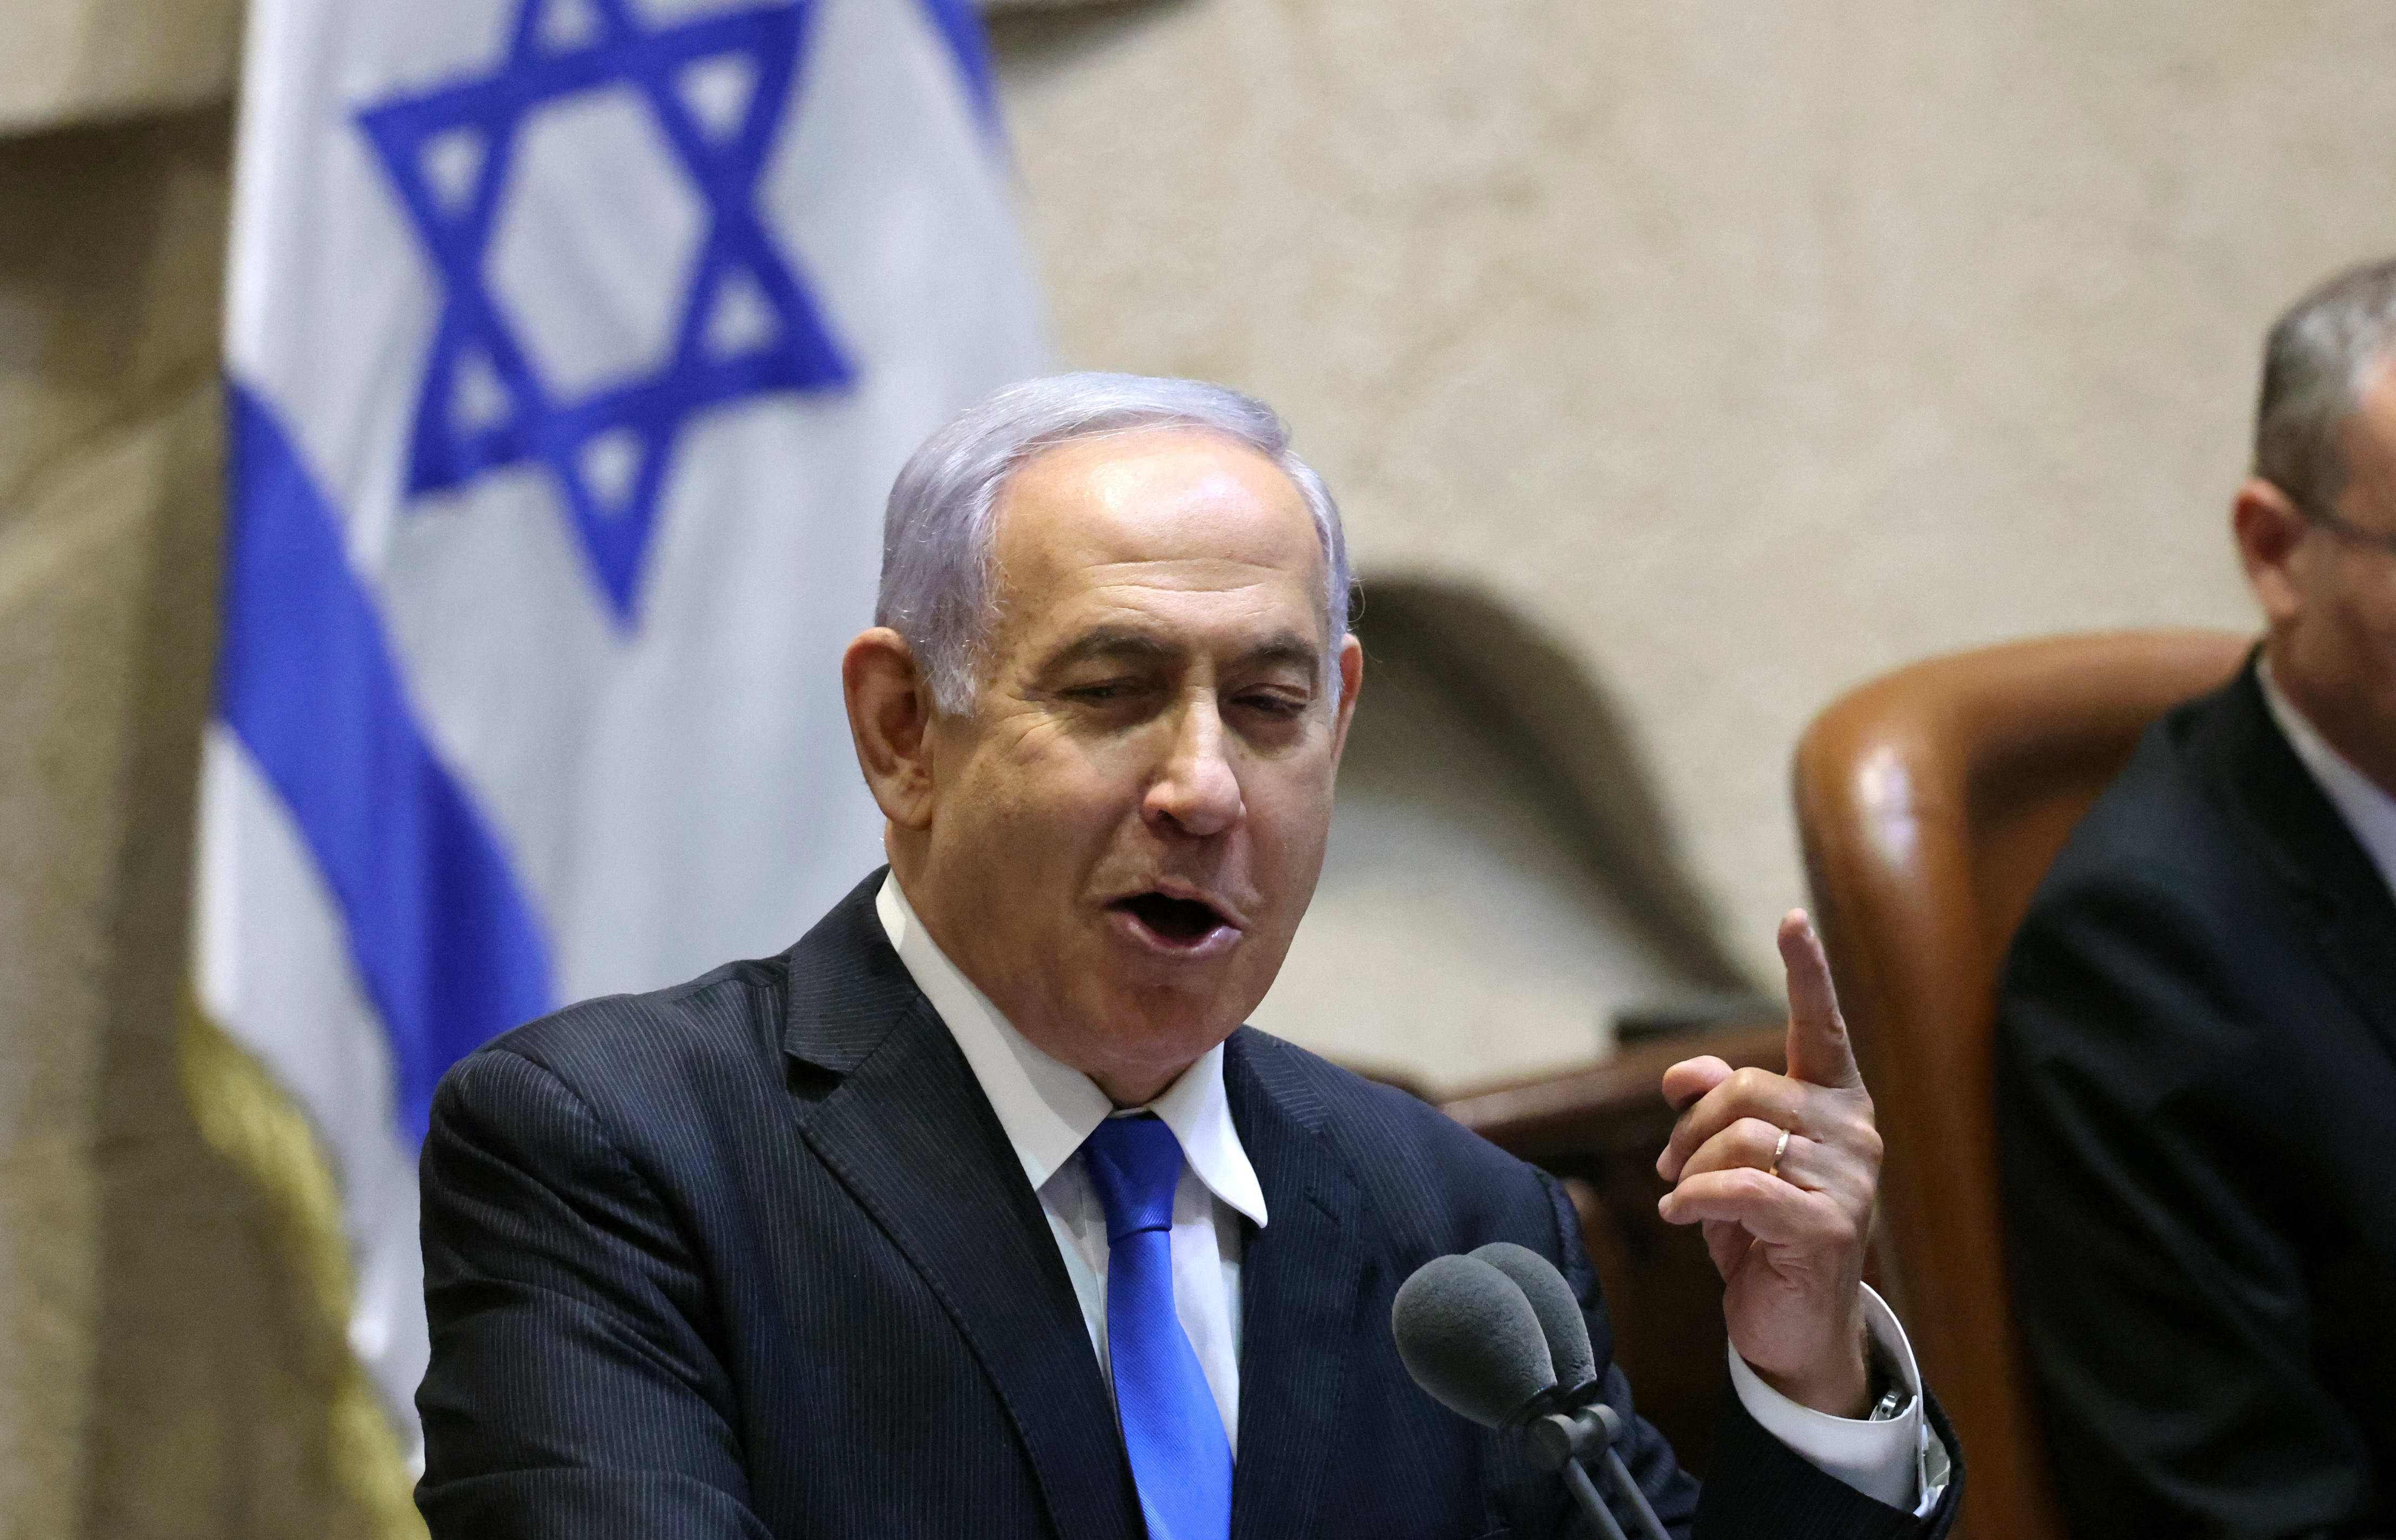 Israel's Prime Minister Benjamin Netanyahu addresses lawmakers during a special session to vote on a new government at the Knesset in Jerusalem, on 13 June 2021.